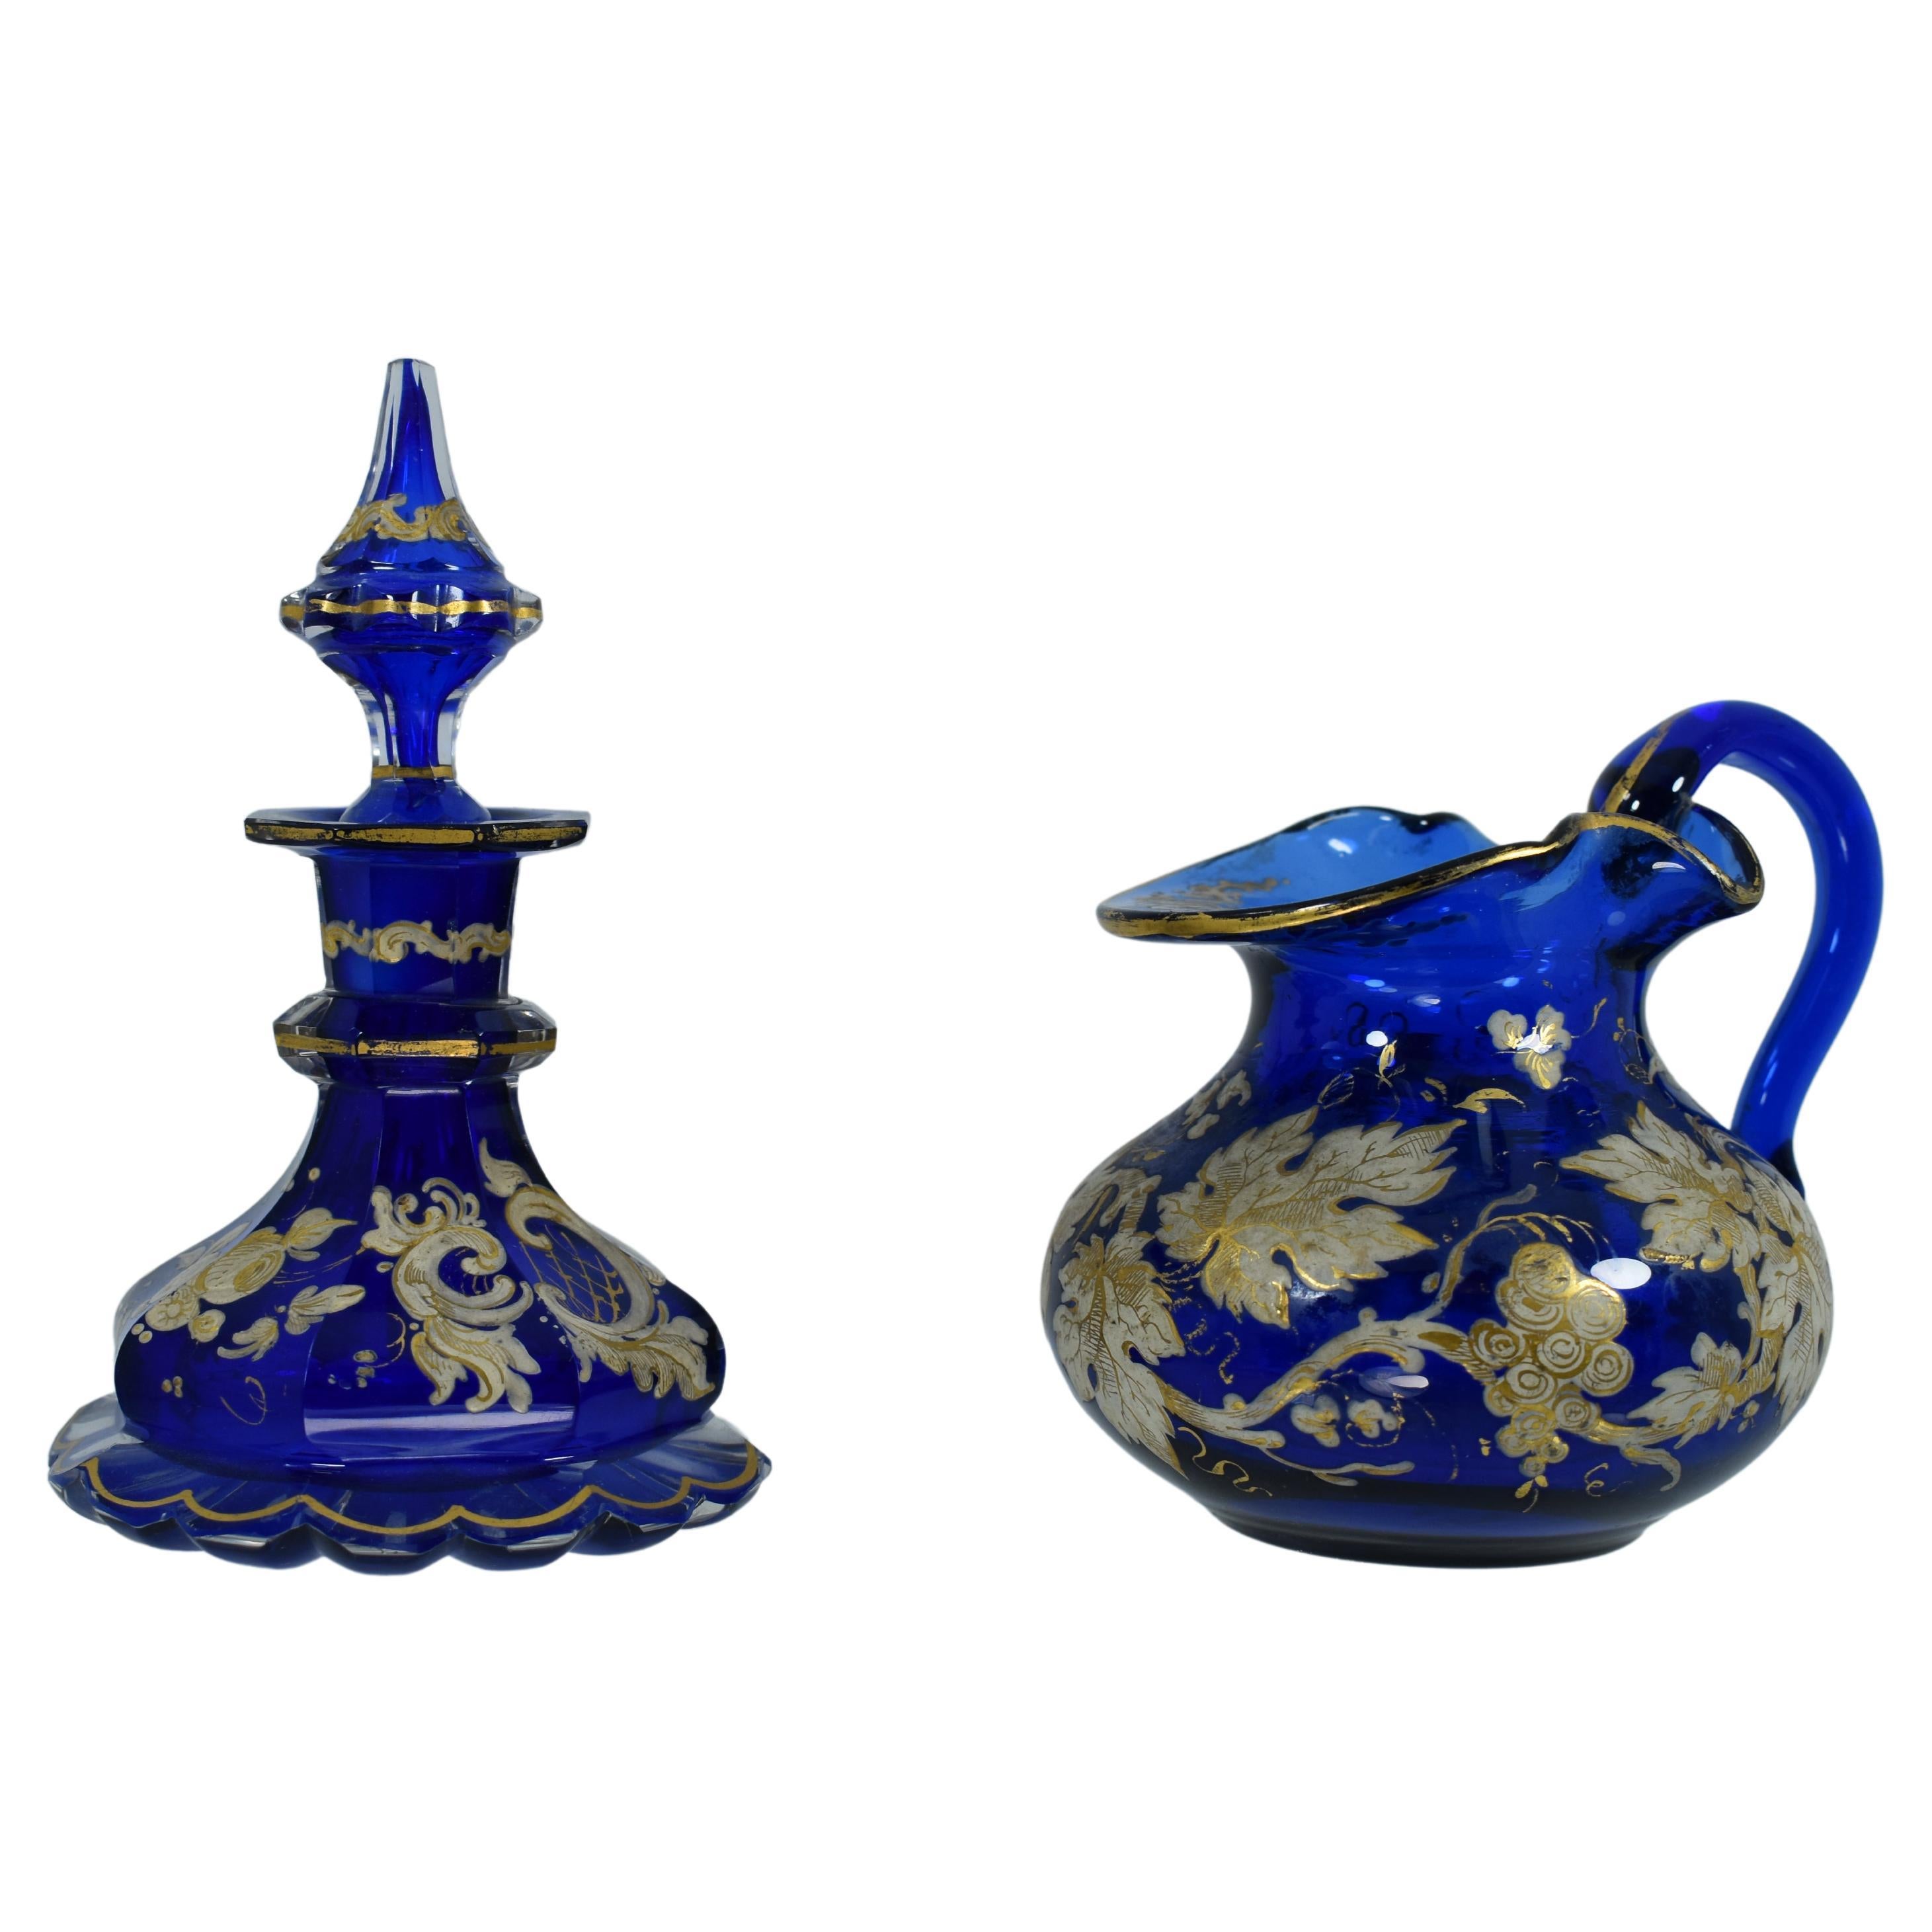 A perfume bottle and a milk jug in cobalt blue crystal from the Bohemian glass manufacture of the 19th century.
Profuse enamelled with flowers, vines and scrollworks.
Bohemia, Circa 1880
Bottle stands 12.5 cm high.